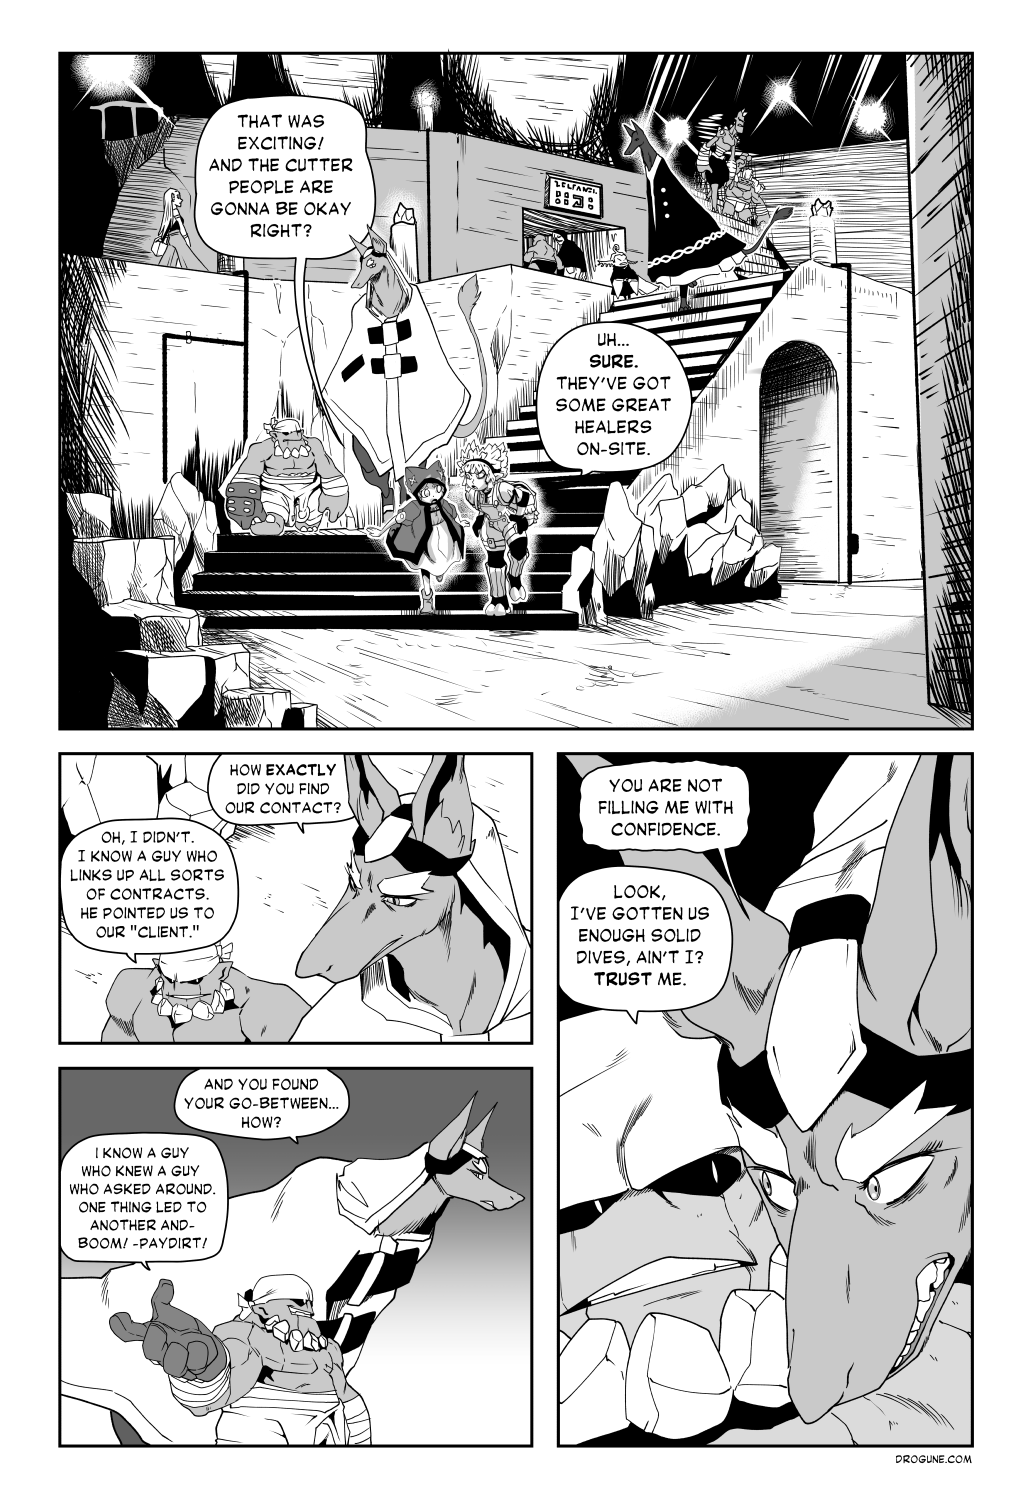 Book I • Page 55